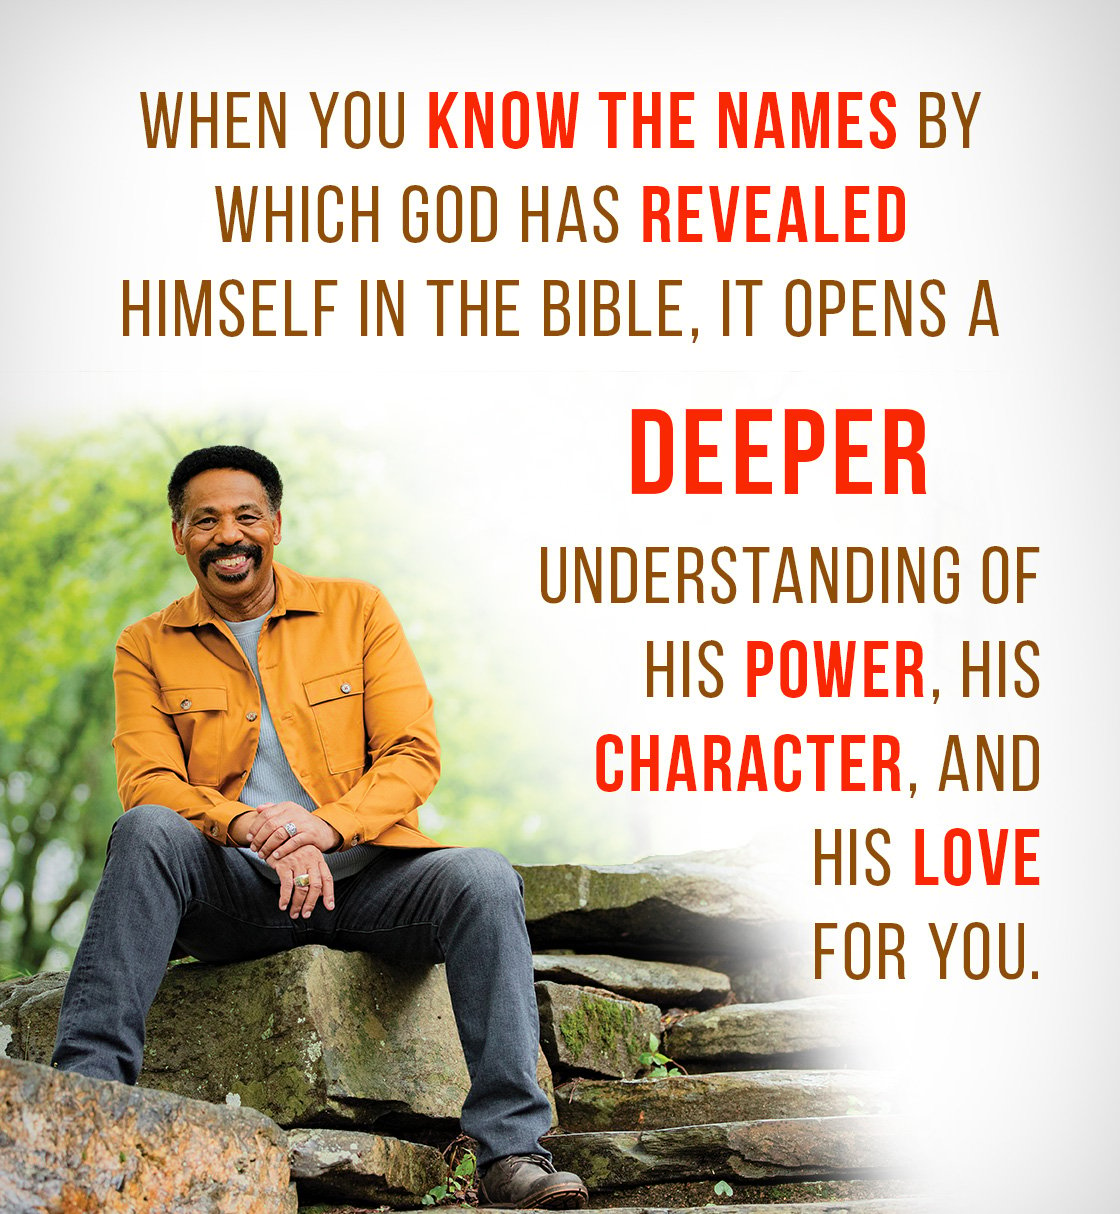 When you know the names by which God has revealed Himself in the Bible, it opens a deeper understanding of His power, His character, and His love for you.